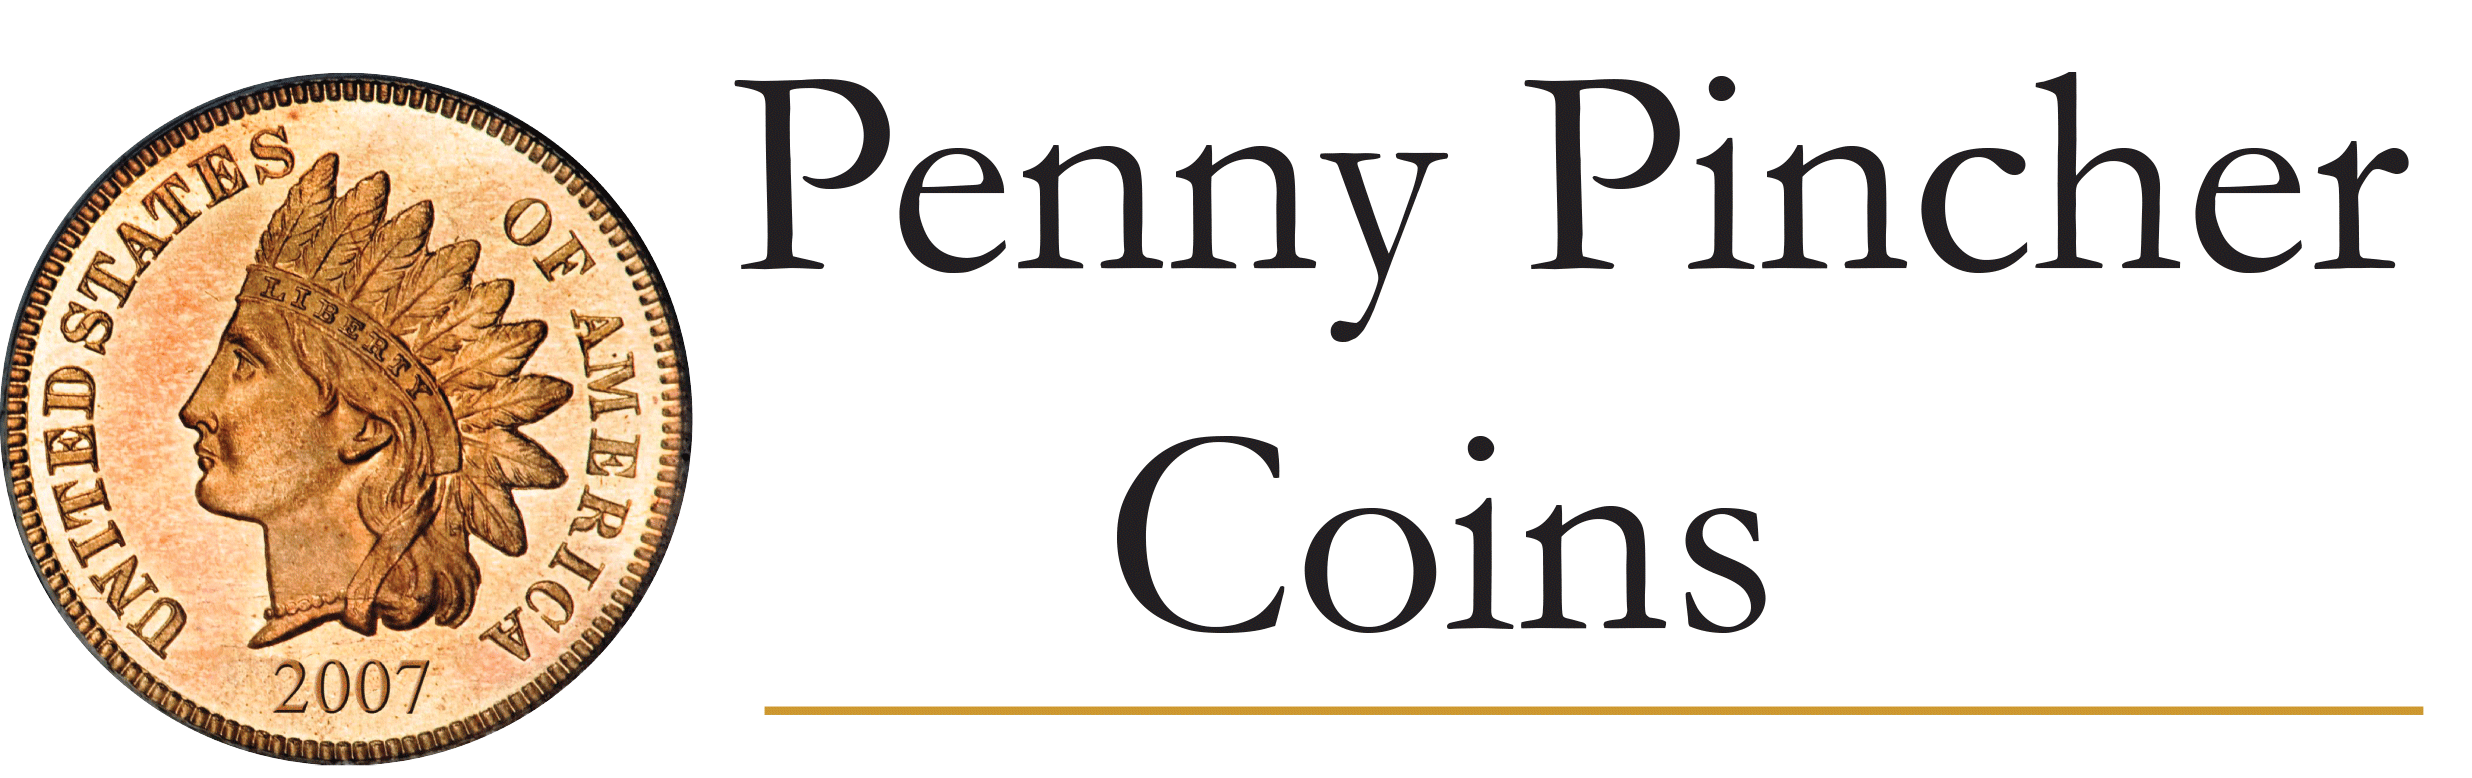 penny-pincher-coins